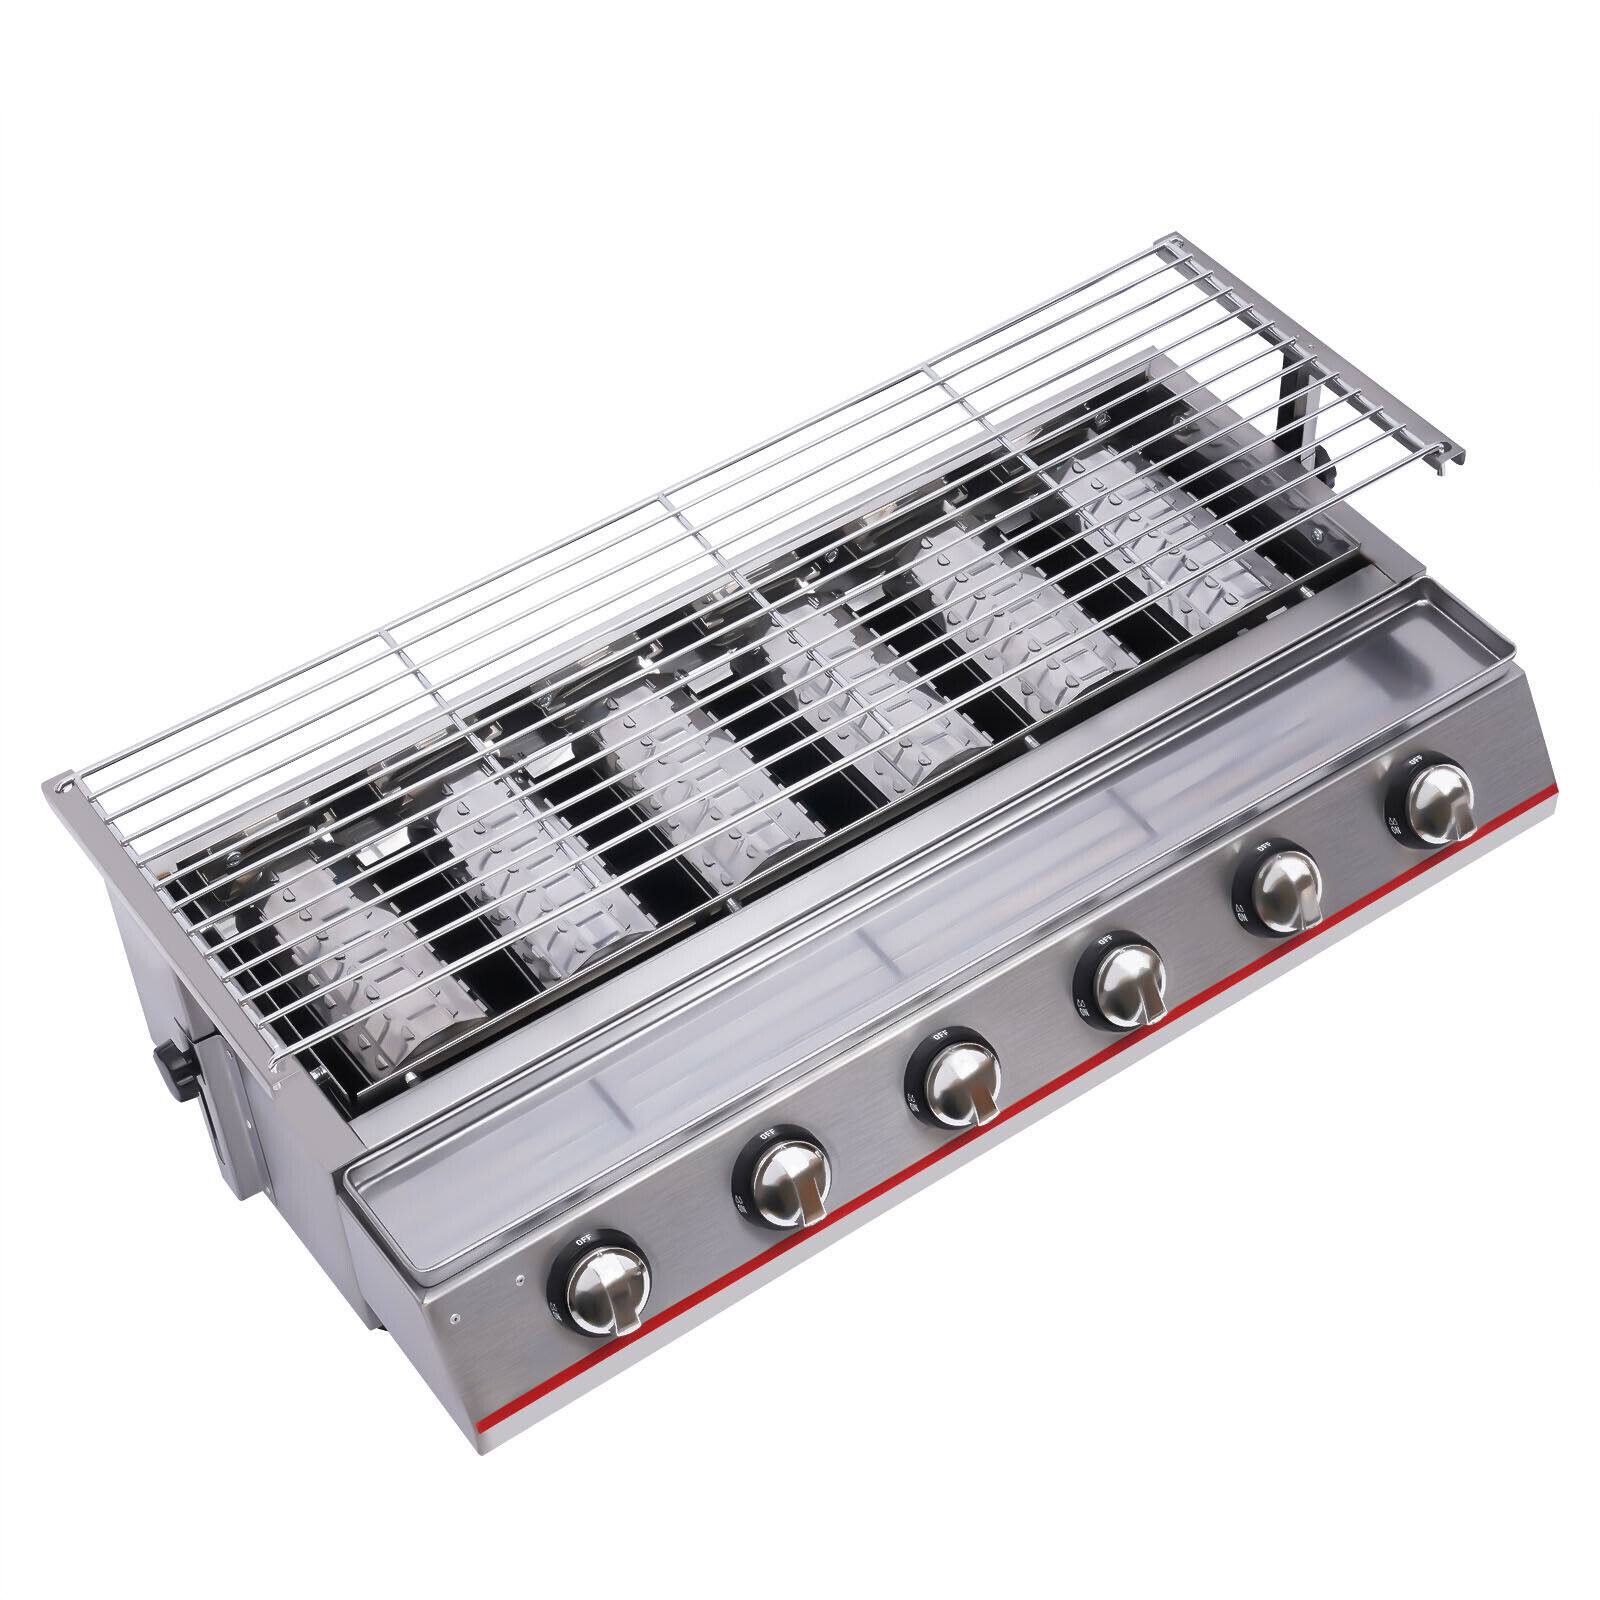 6-Burner BBQ Gas Grill Stainless Steel LPG Tabletop Camping Grill 31.5",Commercial Gas LPG Grill 2800PA Outdoor BBQ Tabletop Cooker 6 Burner - image 4 of 12